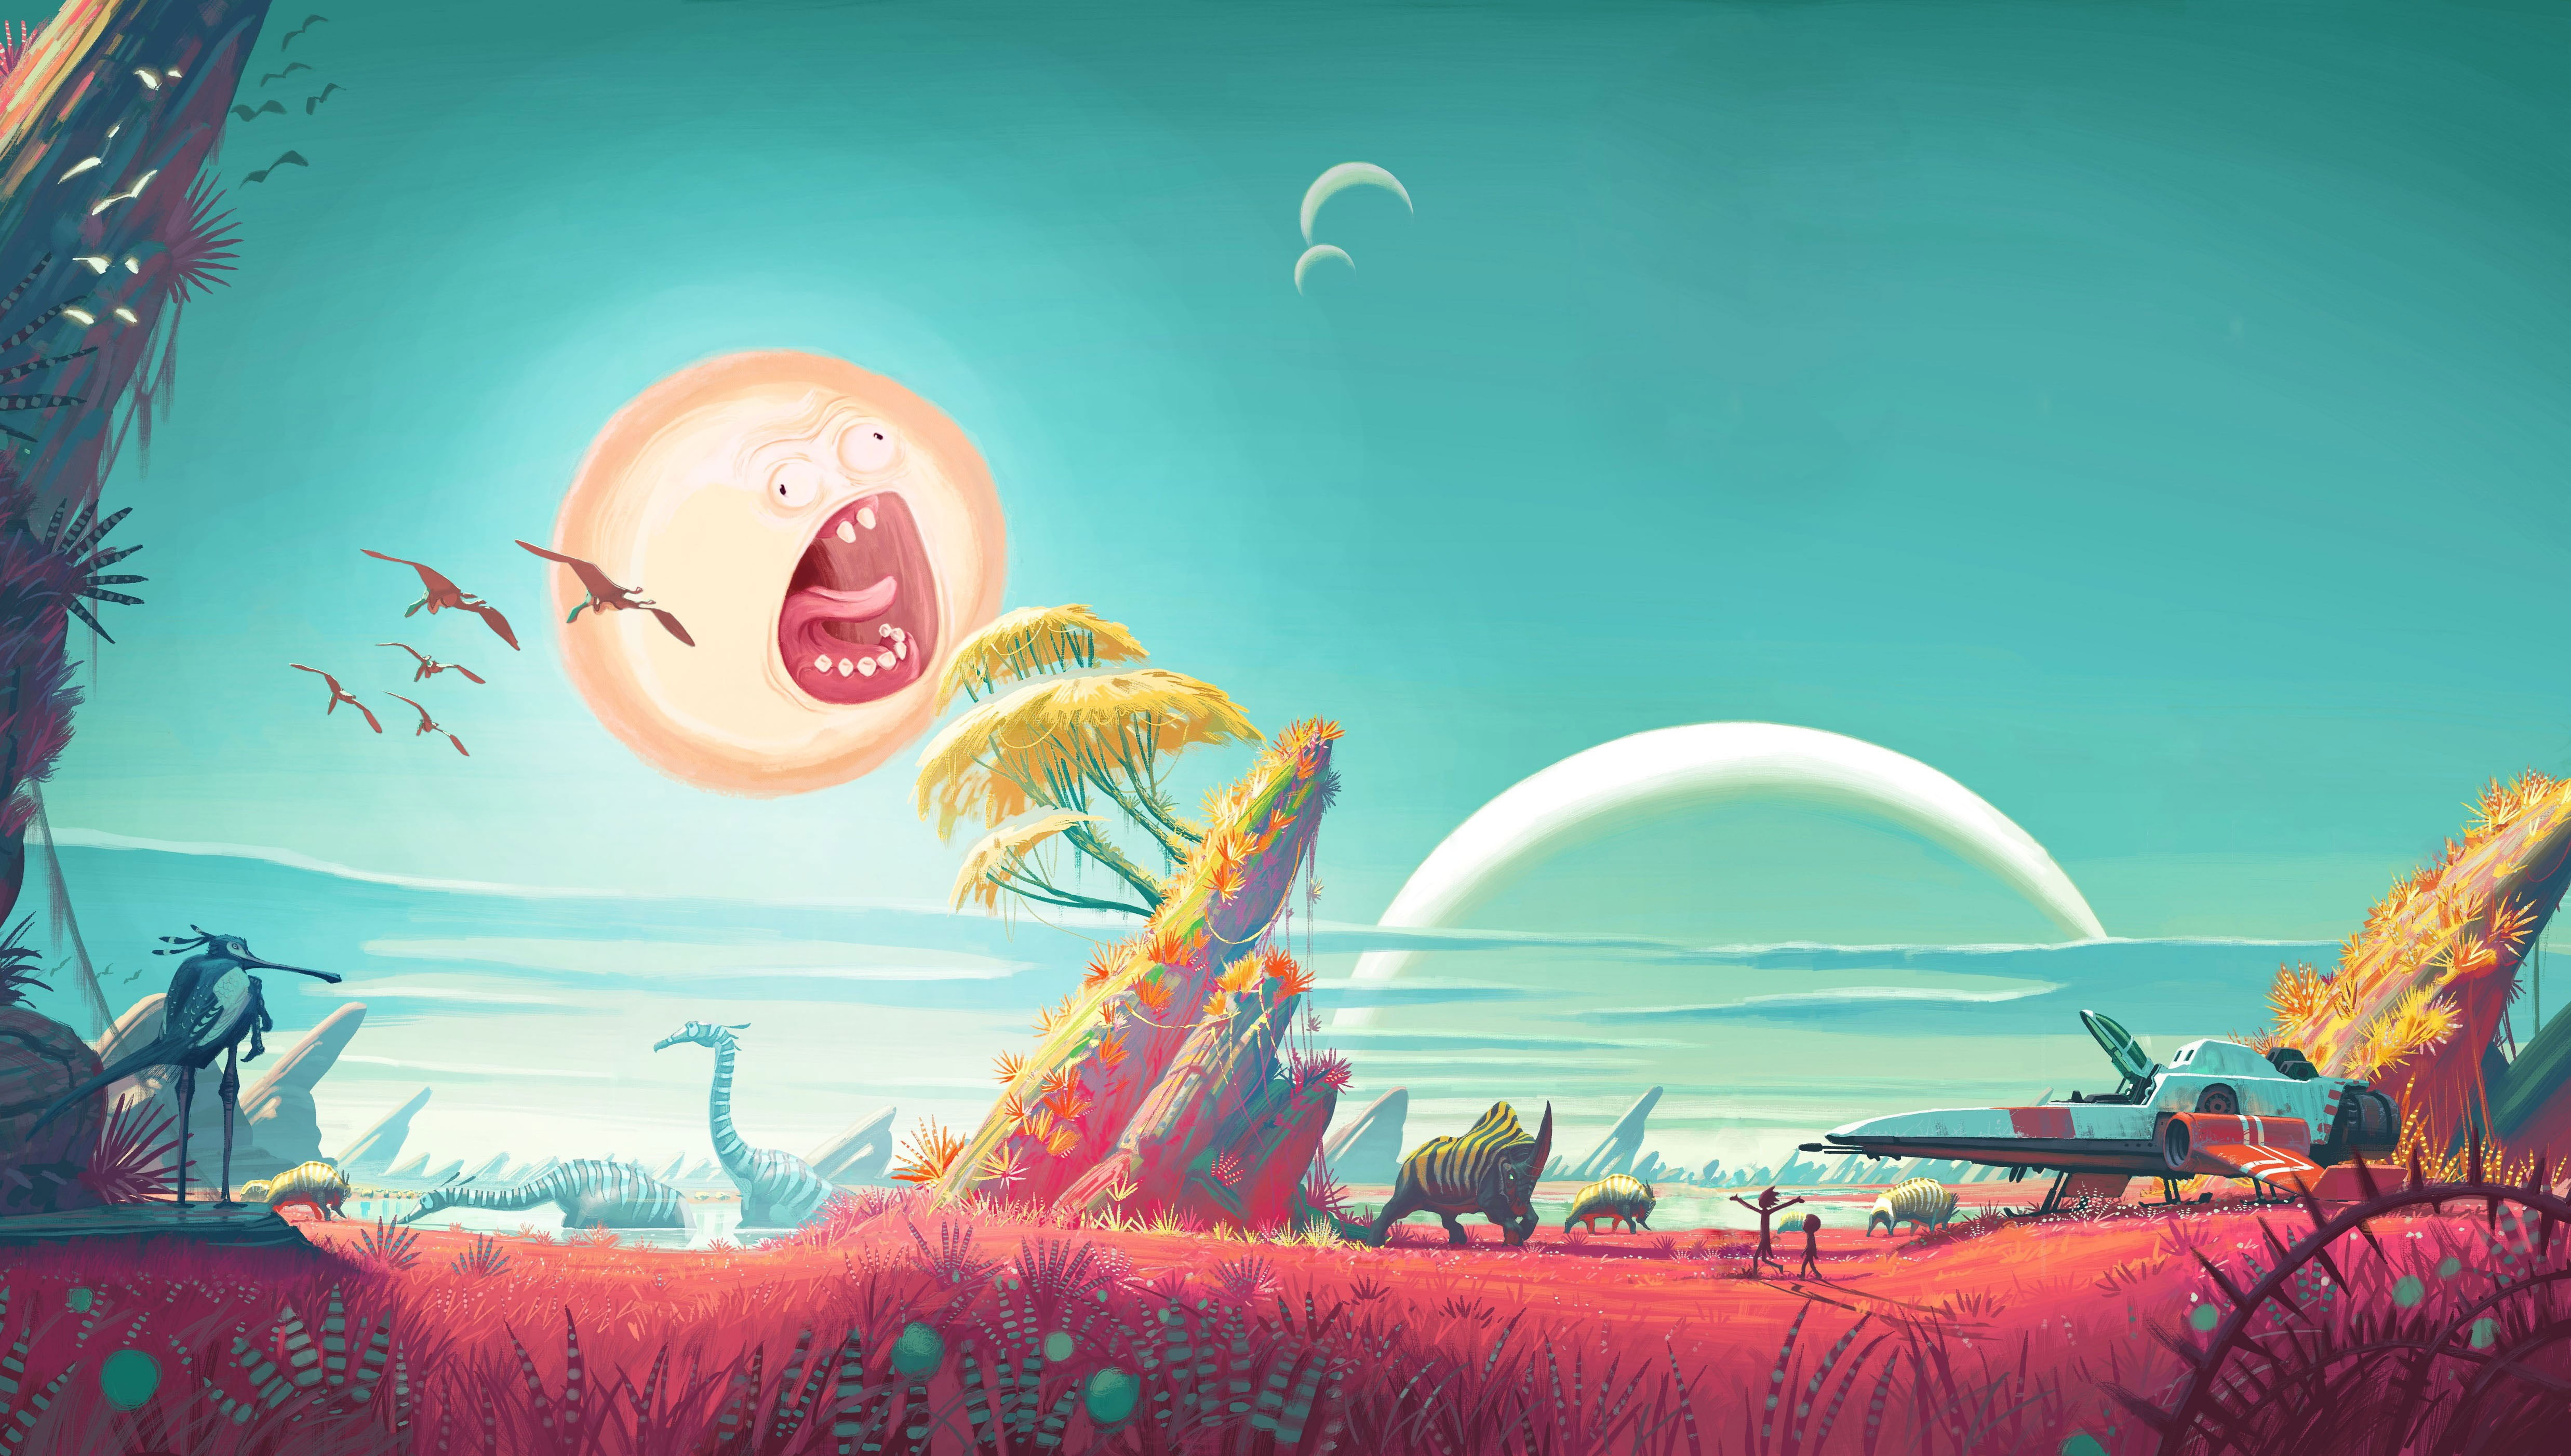 Wallpaper Red Grass Field With Dinosaurs Illustration, Rick And Morty, Movies